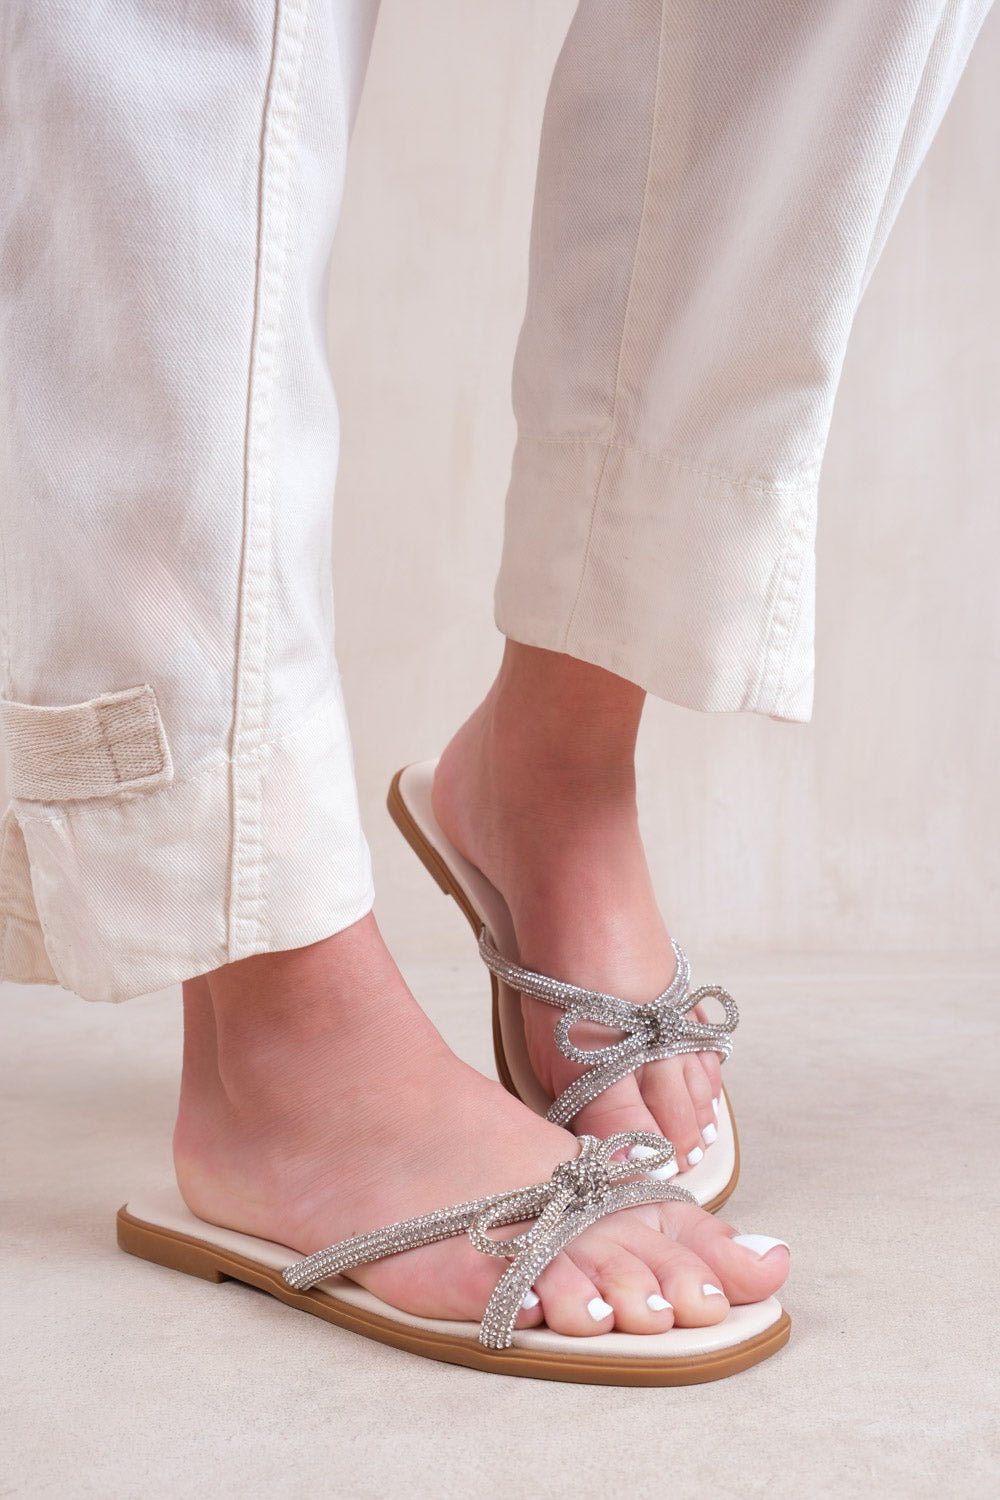 EARTH FLAT SLIP ON SANDALS WITH BOW DIAMANTE DETAIL IN CREAM FAUX LEATHER